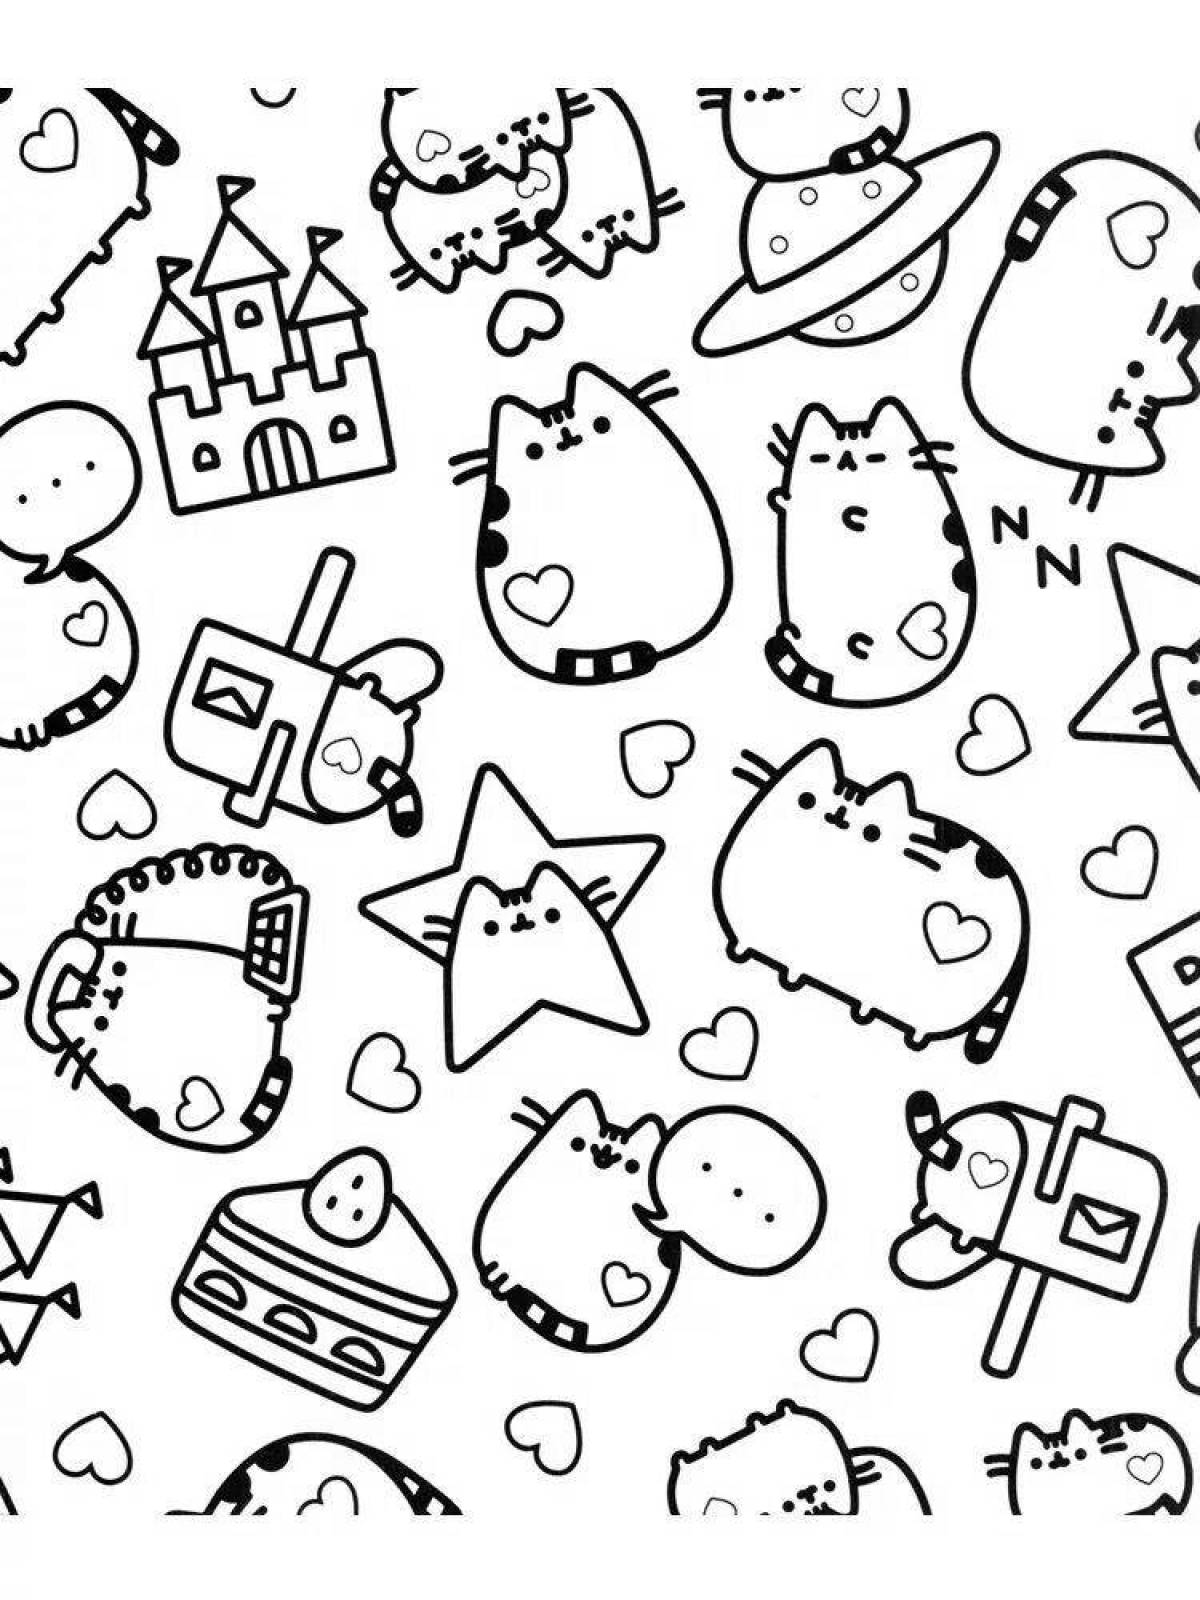 Funny cat sticker coloring page